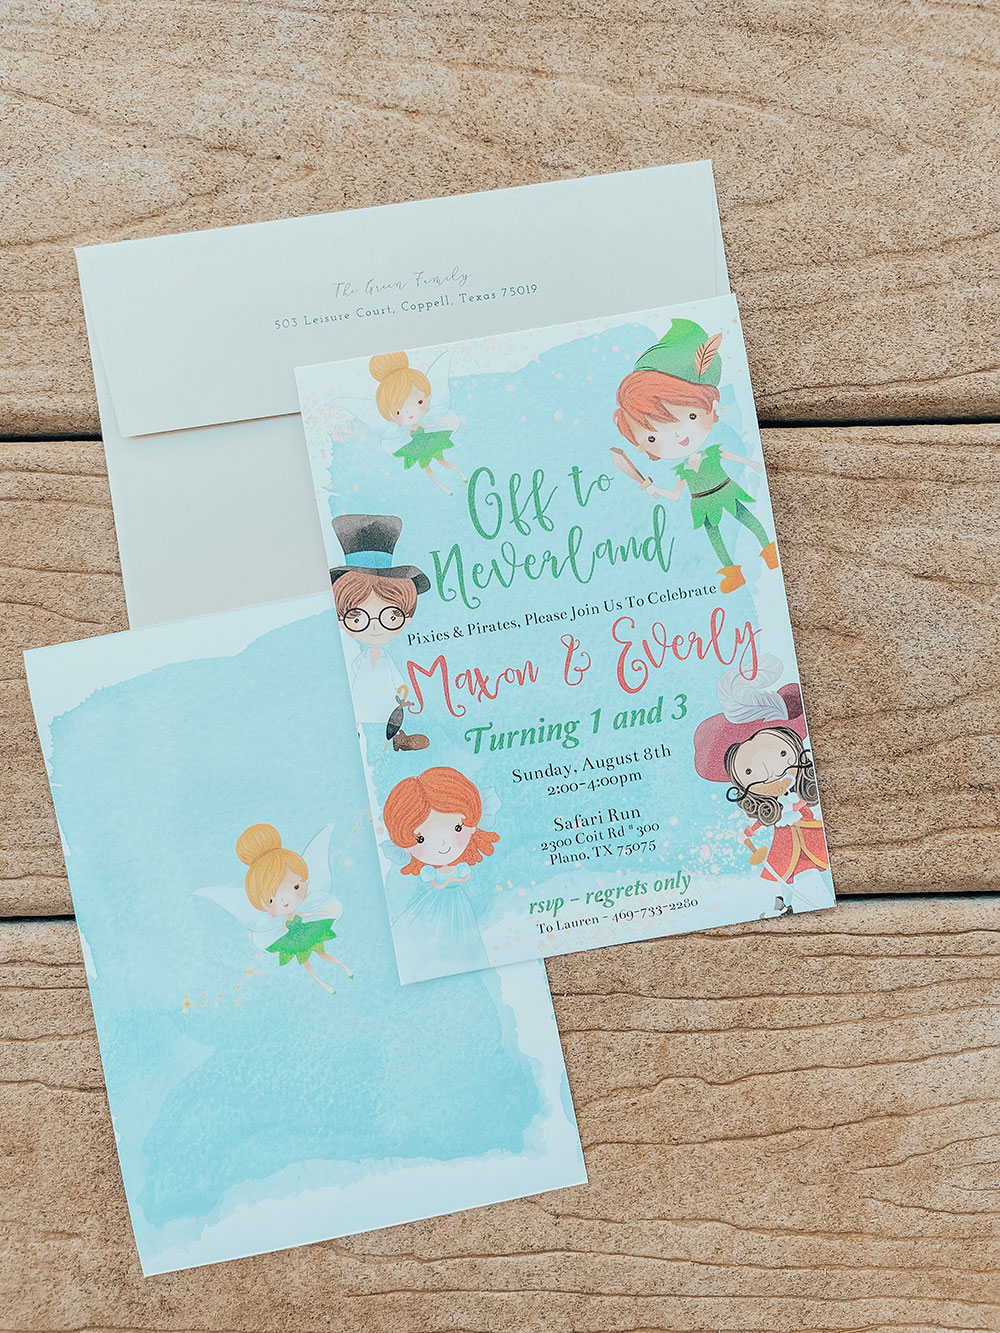 peter pan birthday party invitations pixie and pirate birthday party